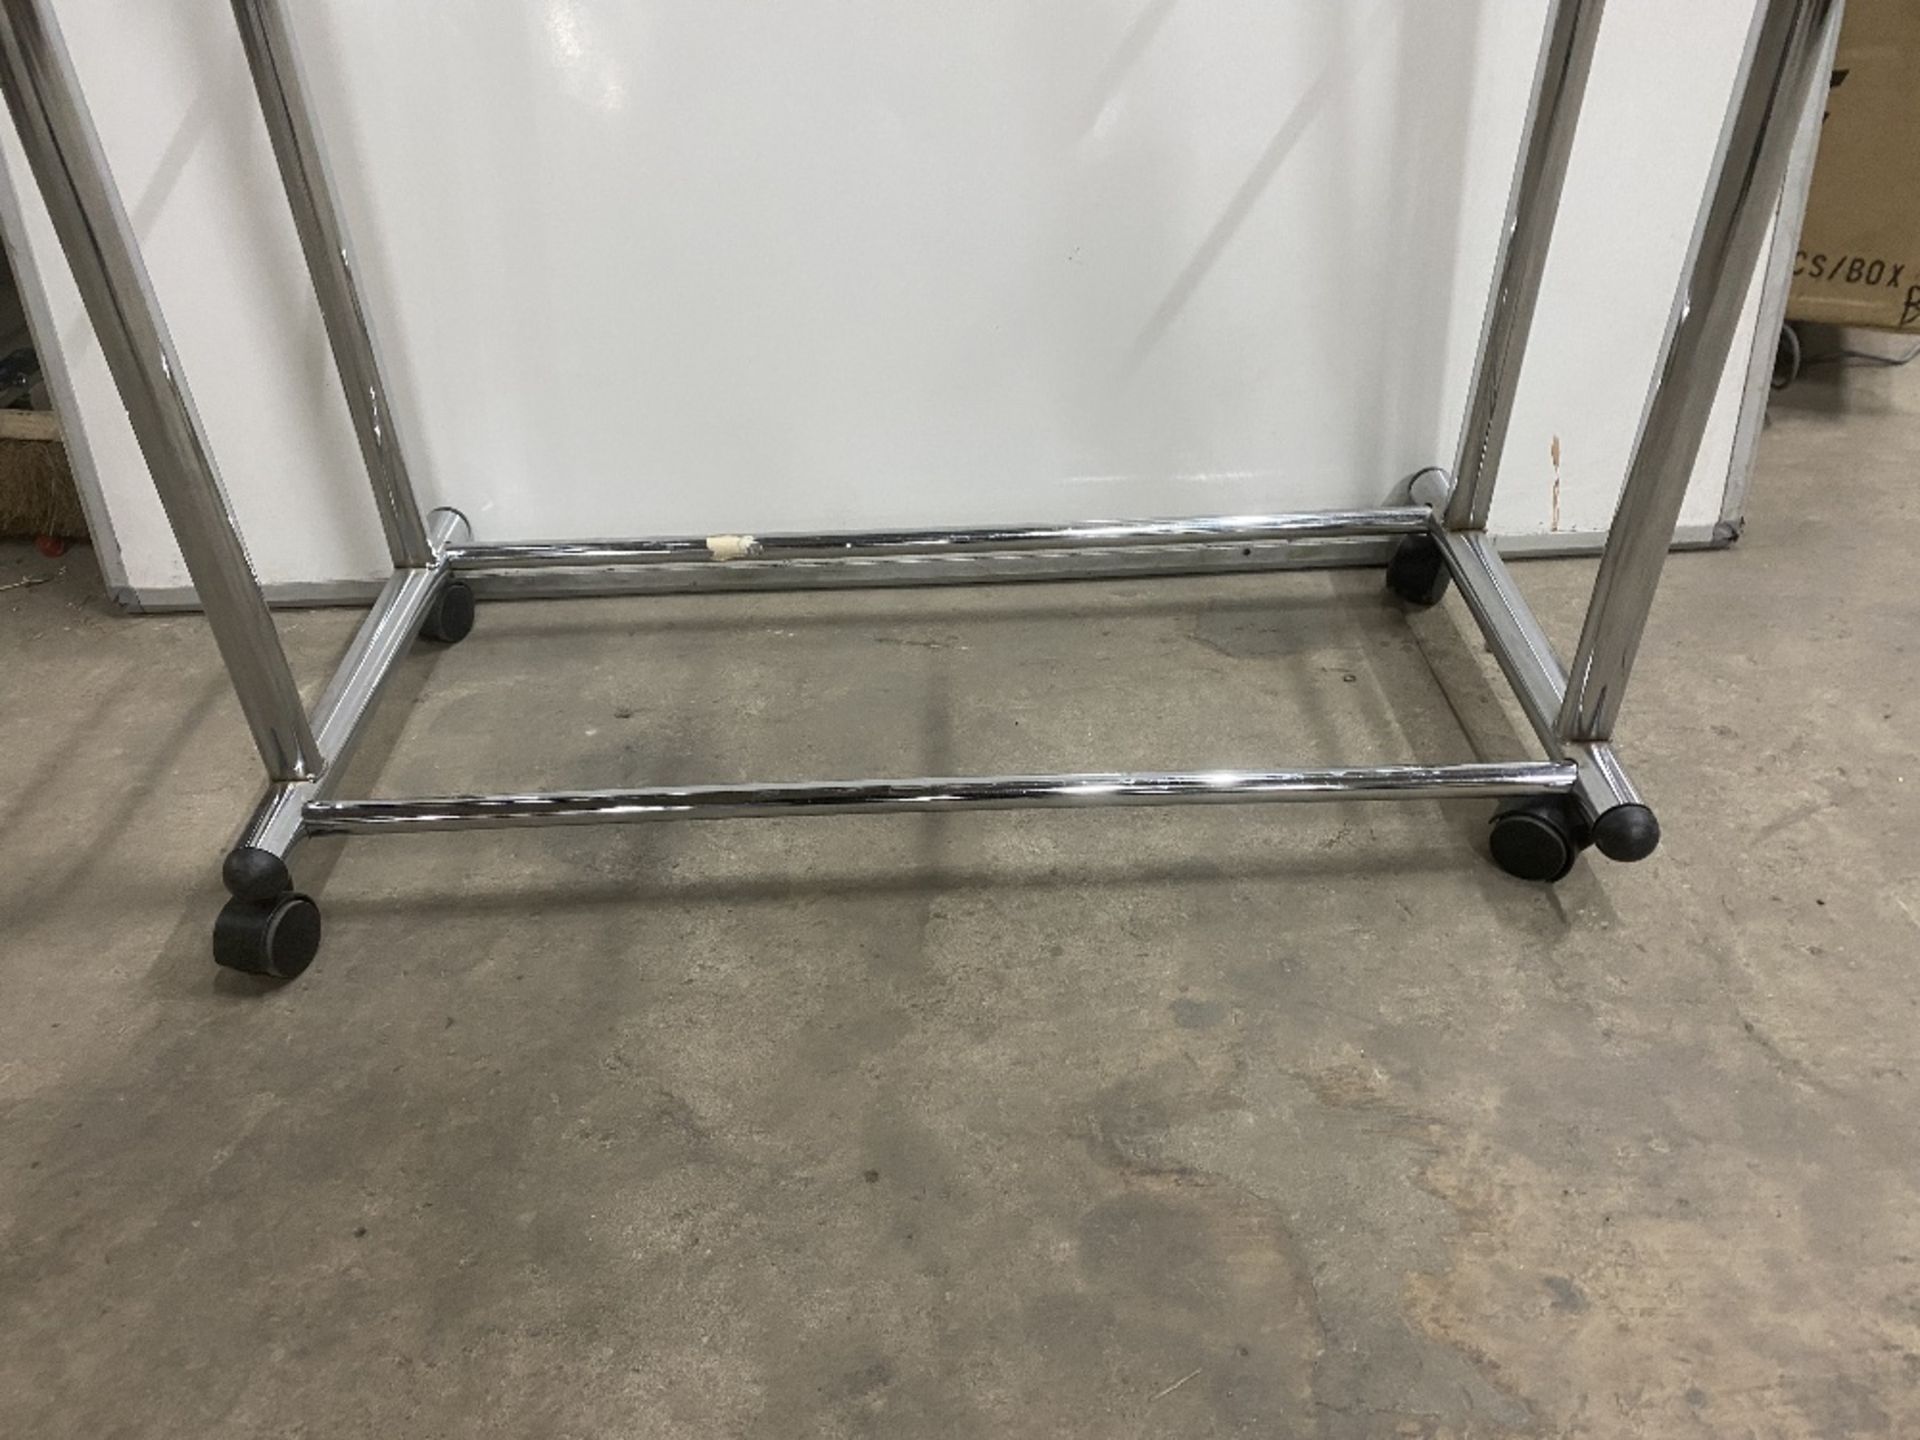 3 x Stainless Steel Portable Adjustable Clothing Rails - Image 7 of 14